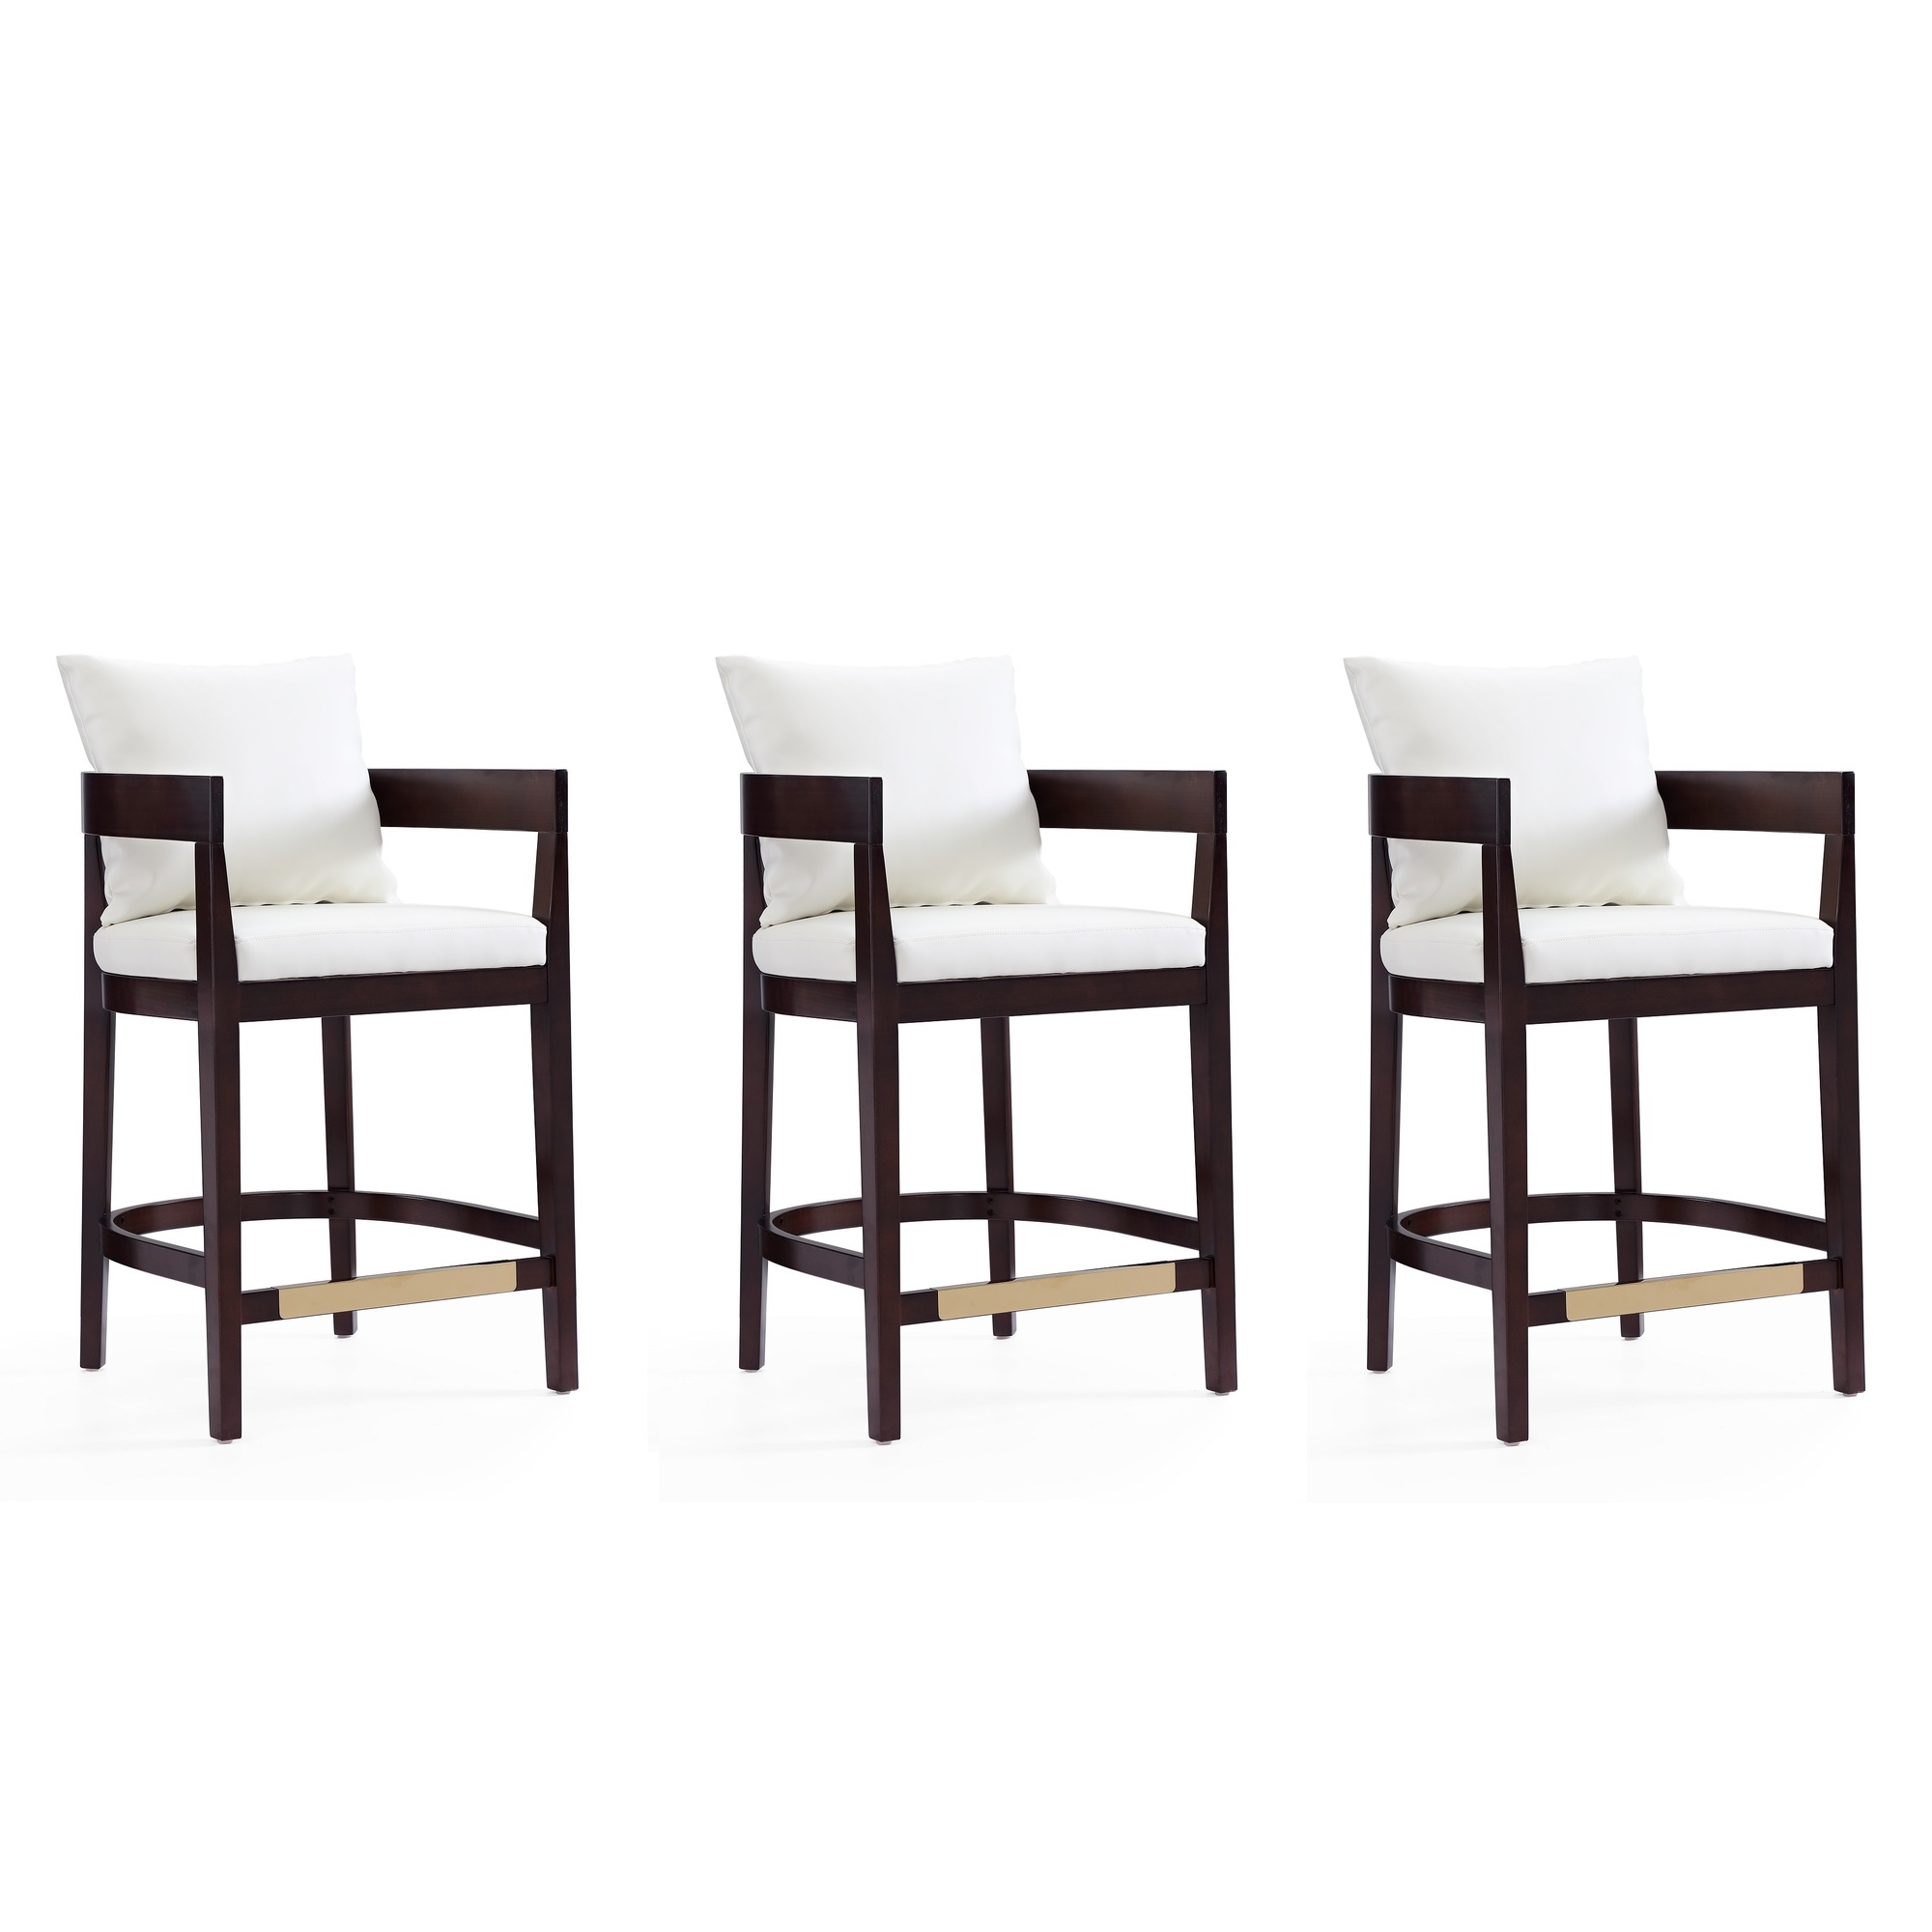 Manhattan Comfort, Ritz 34Inch Ivory Beech Wood Stool Set of 3 Primary Color Ivory, Included (qty.) 3 Model 3-CS006